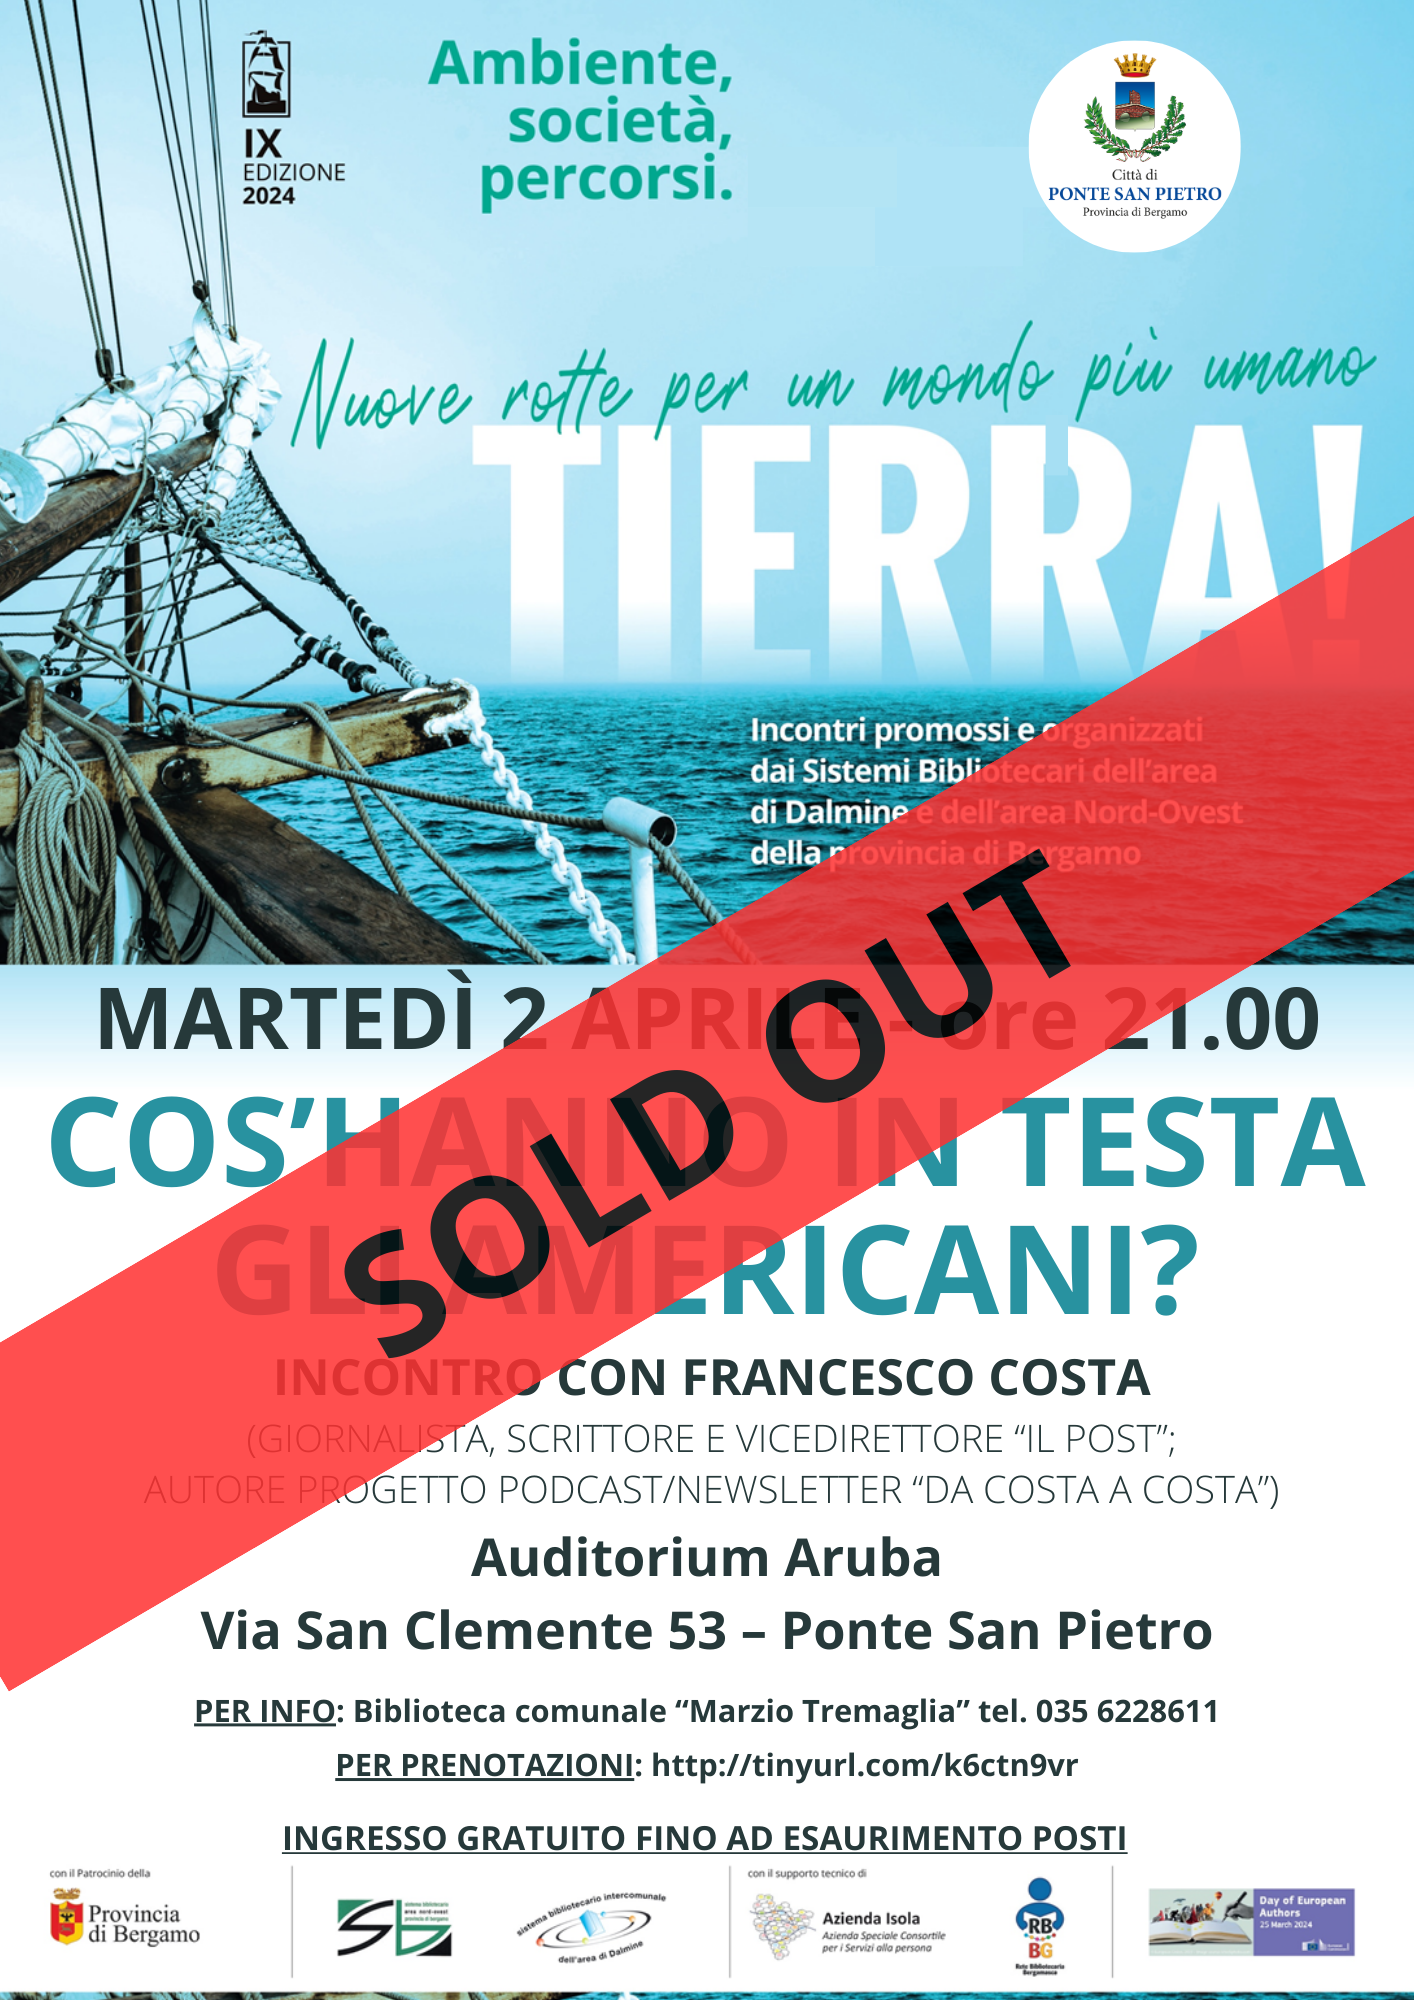 EVENTO SOLD OUT